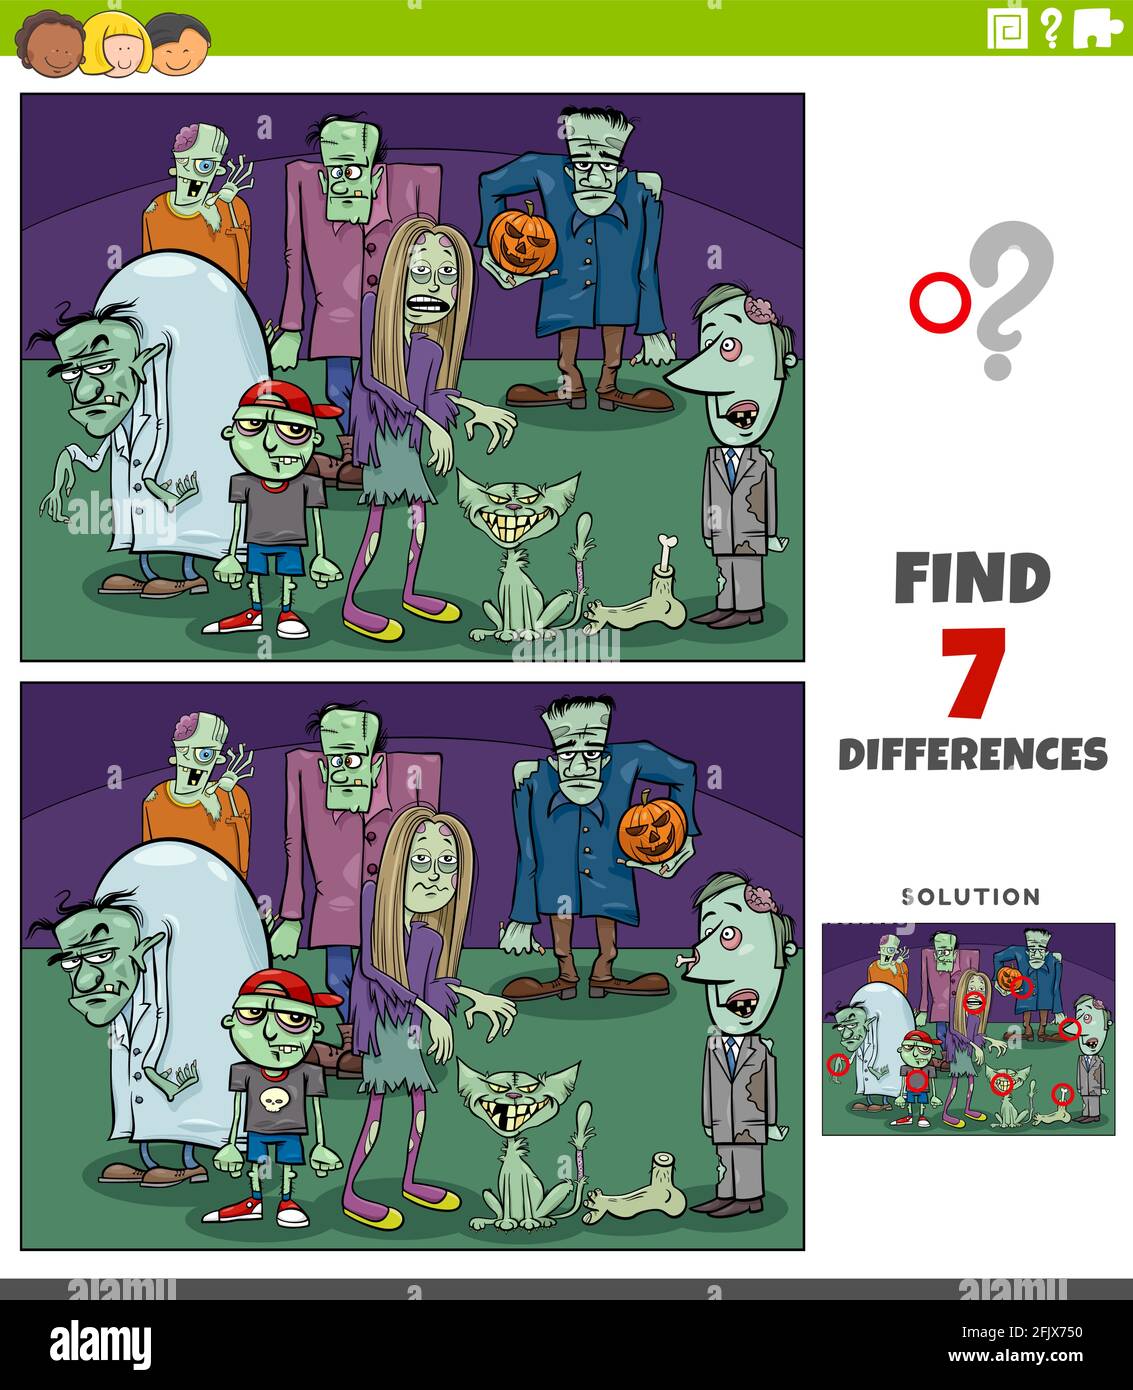 Cartoon illustration of finding the differences between pictures educational game for children with comic zombie characters Stock Vector